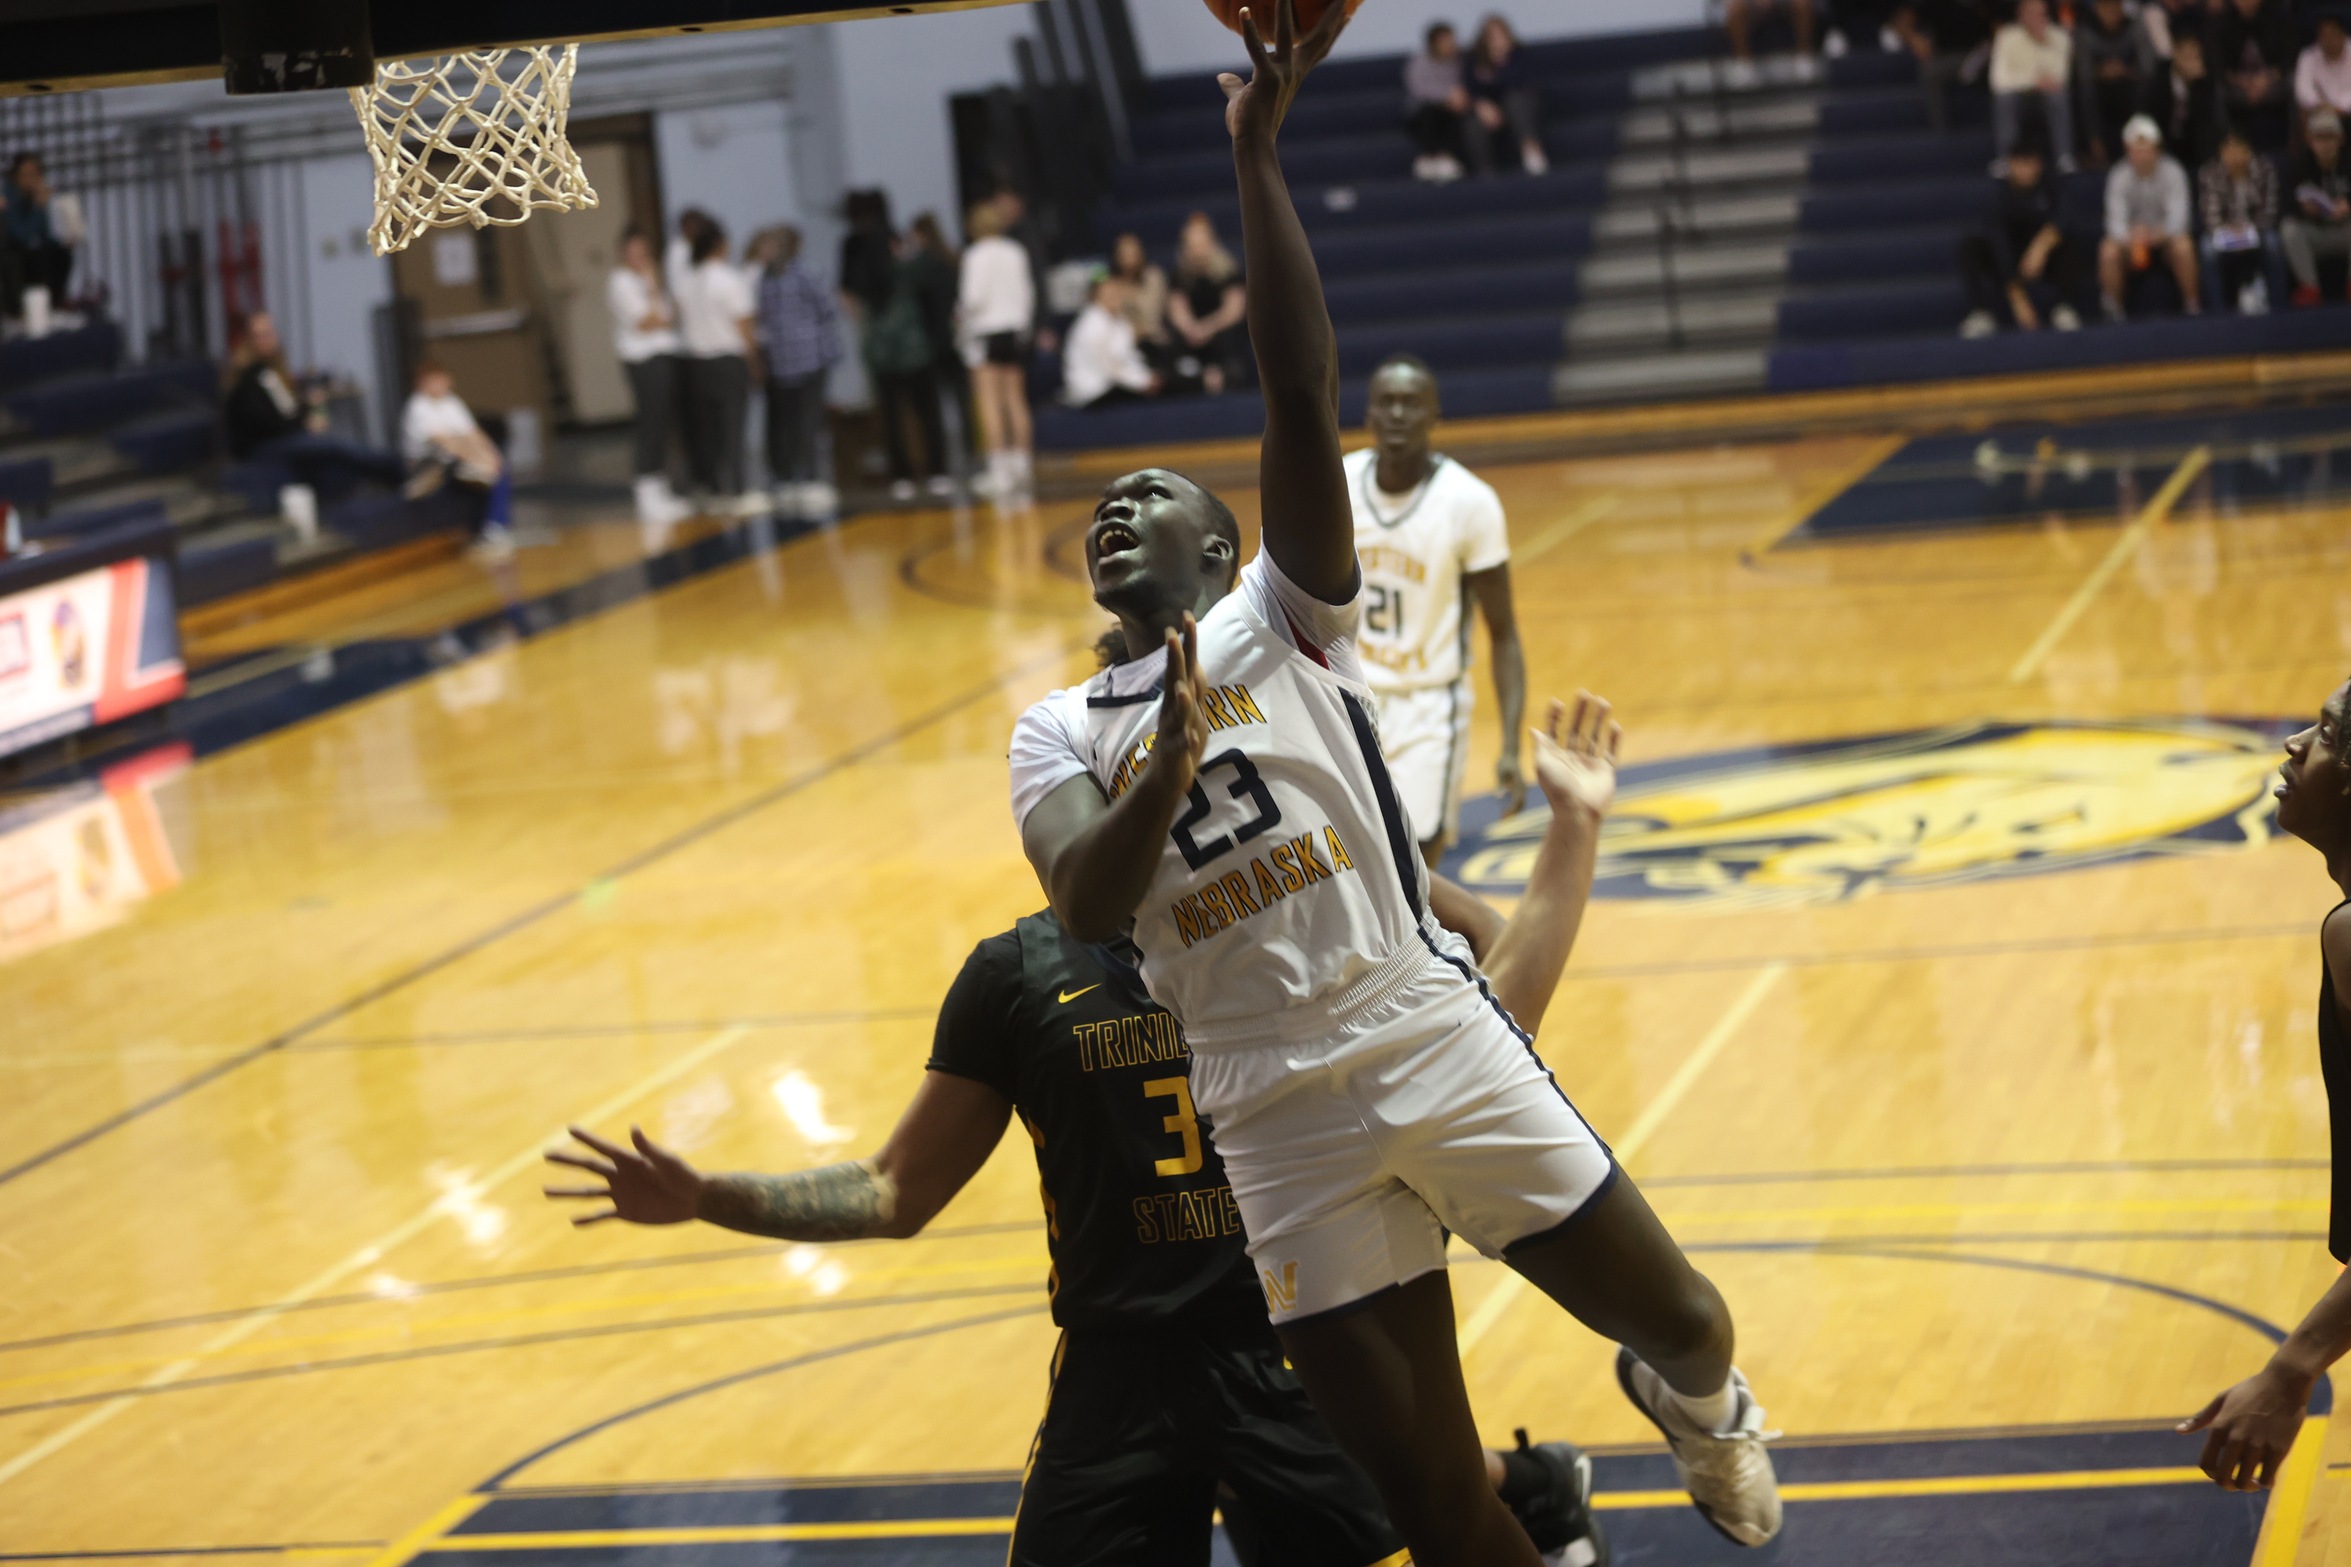 WNCC men capture win over Trinidad State